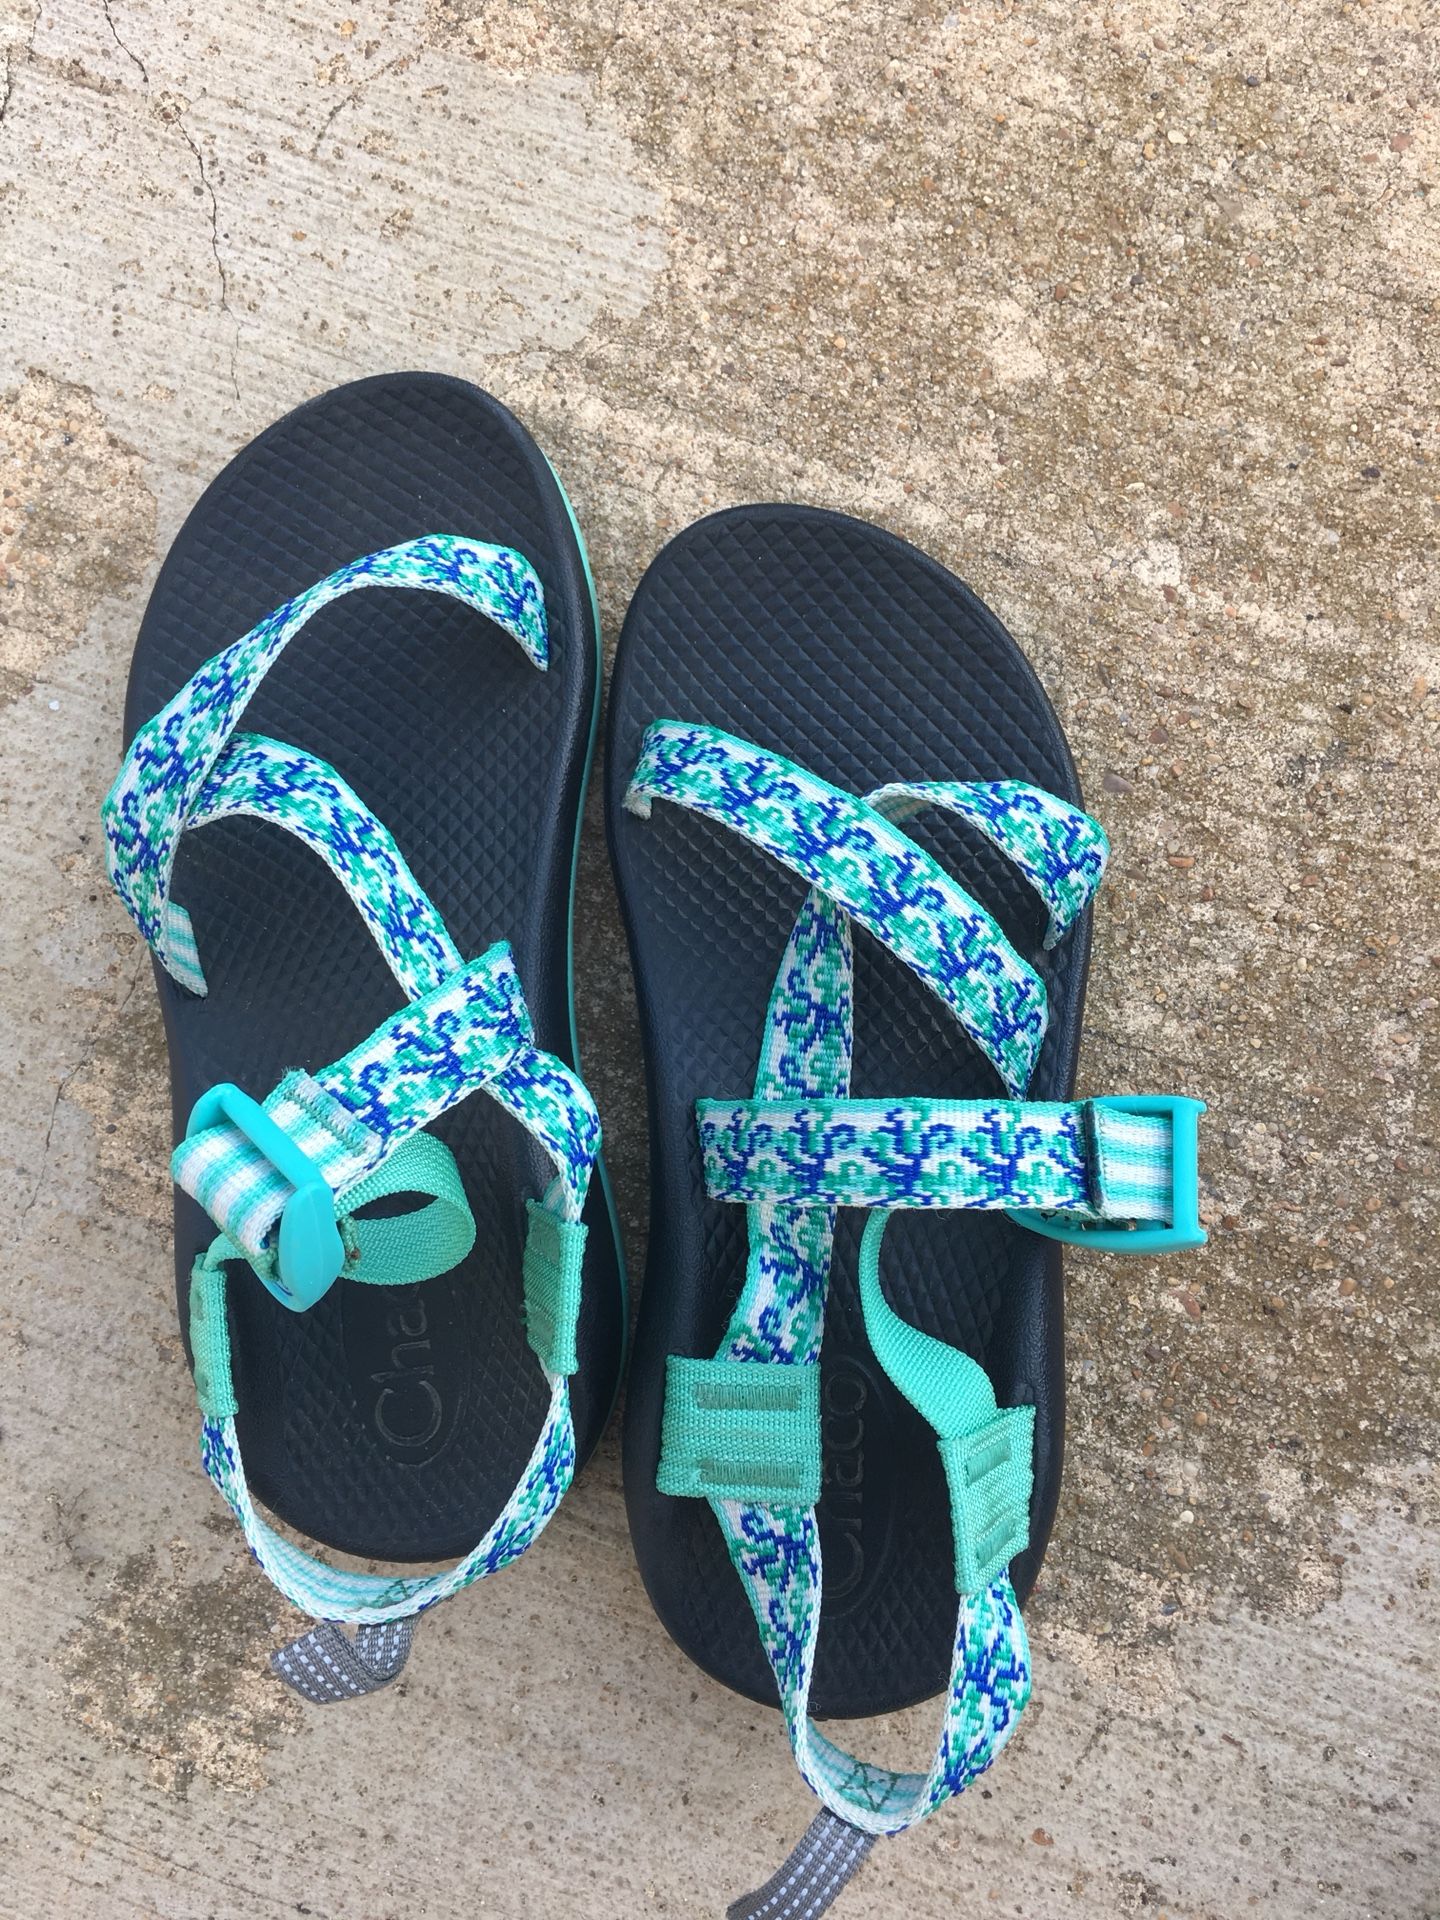 Chaco’s girls sandals size 5